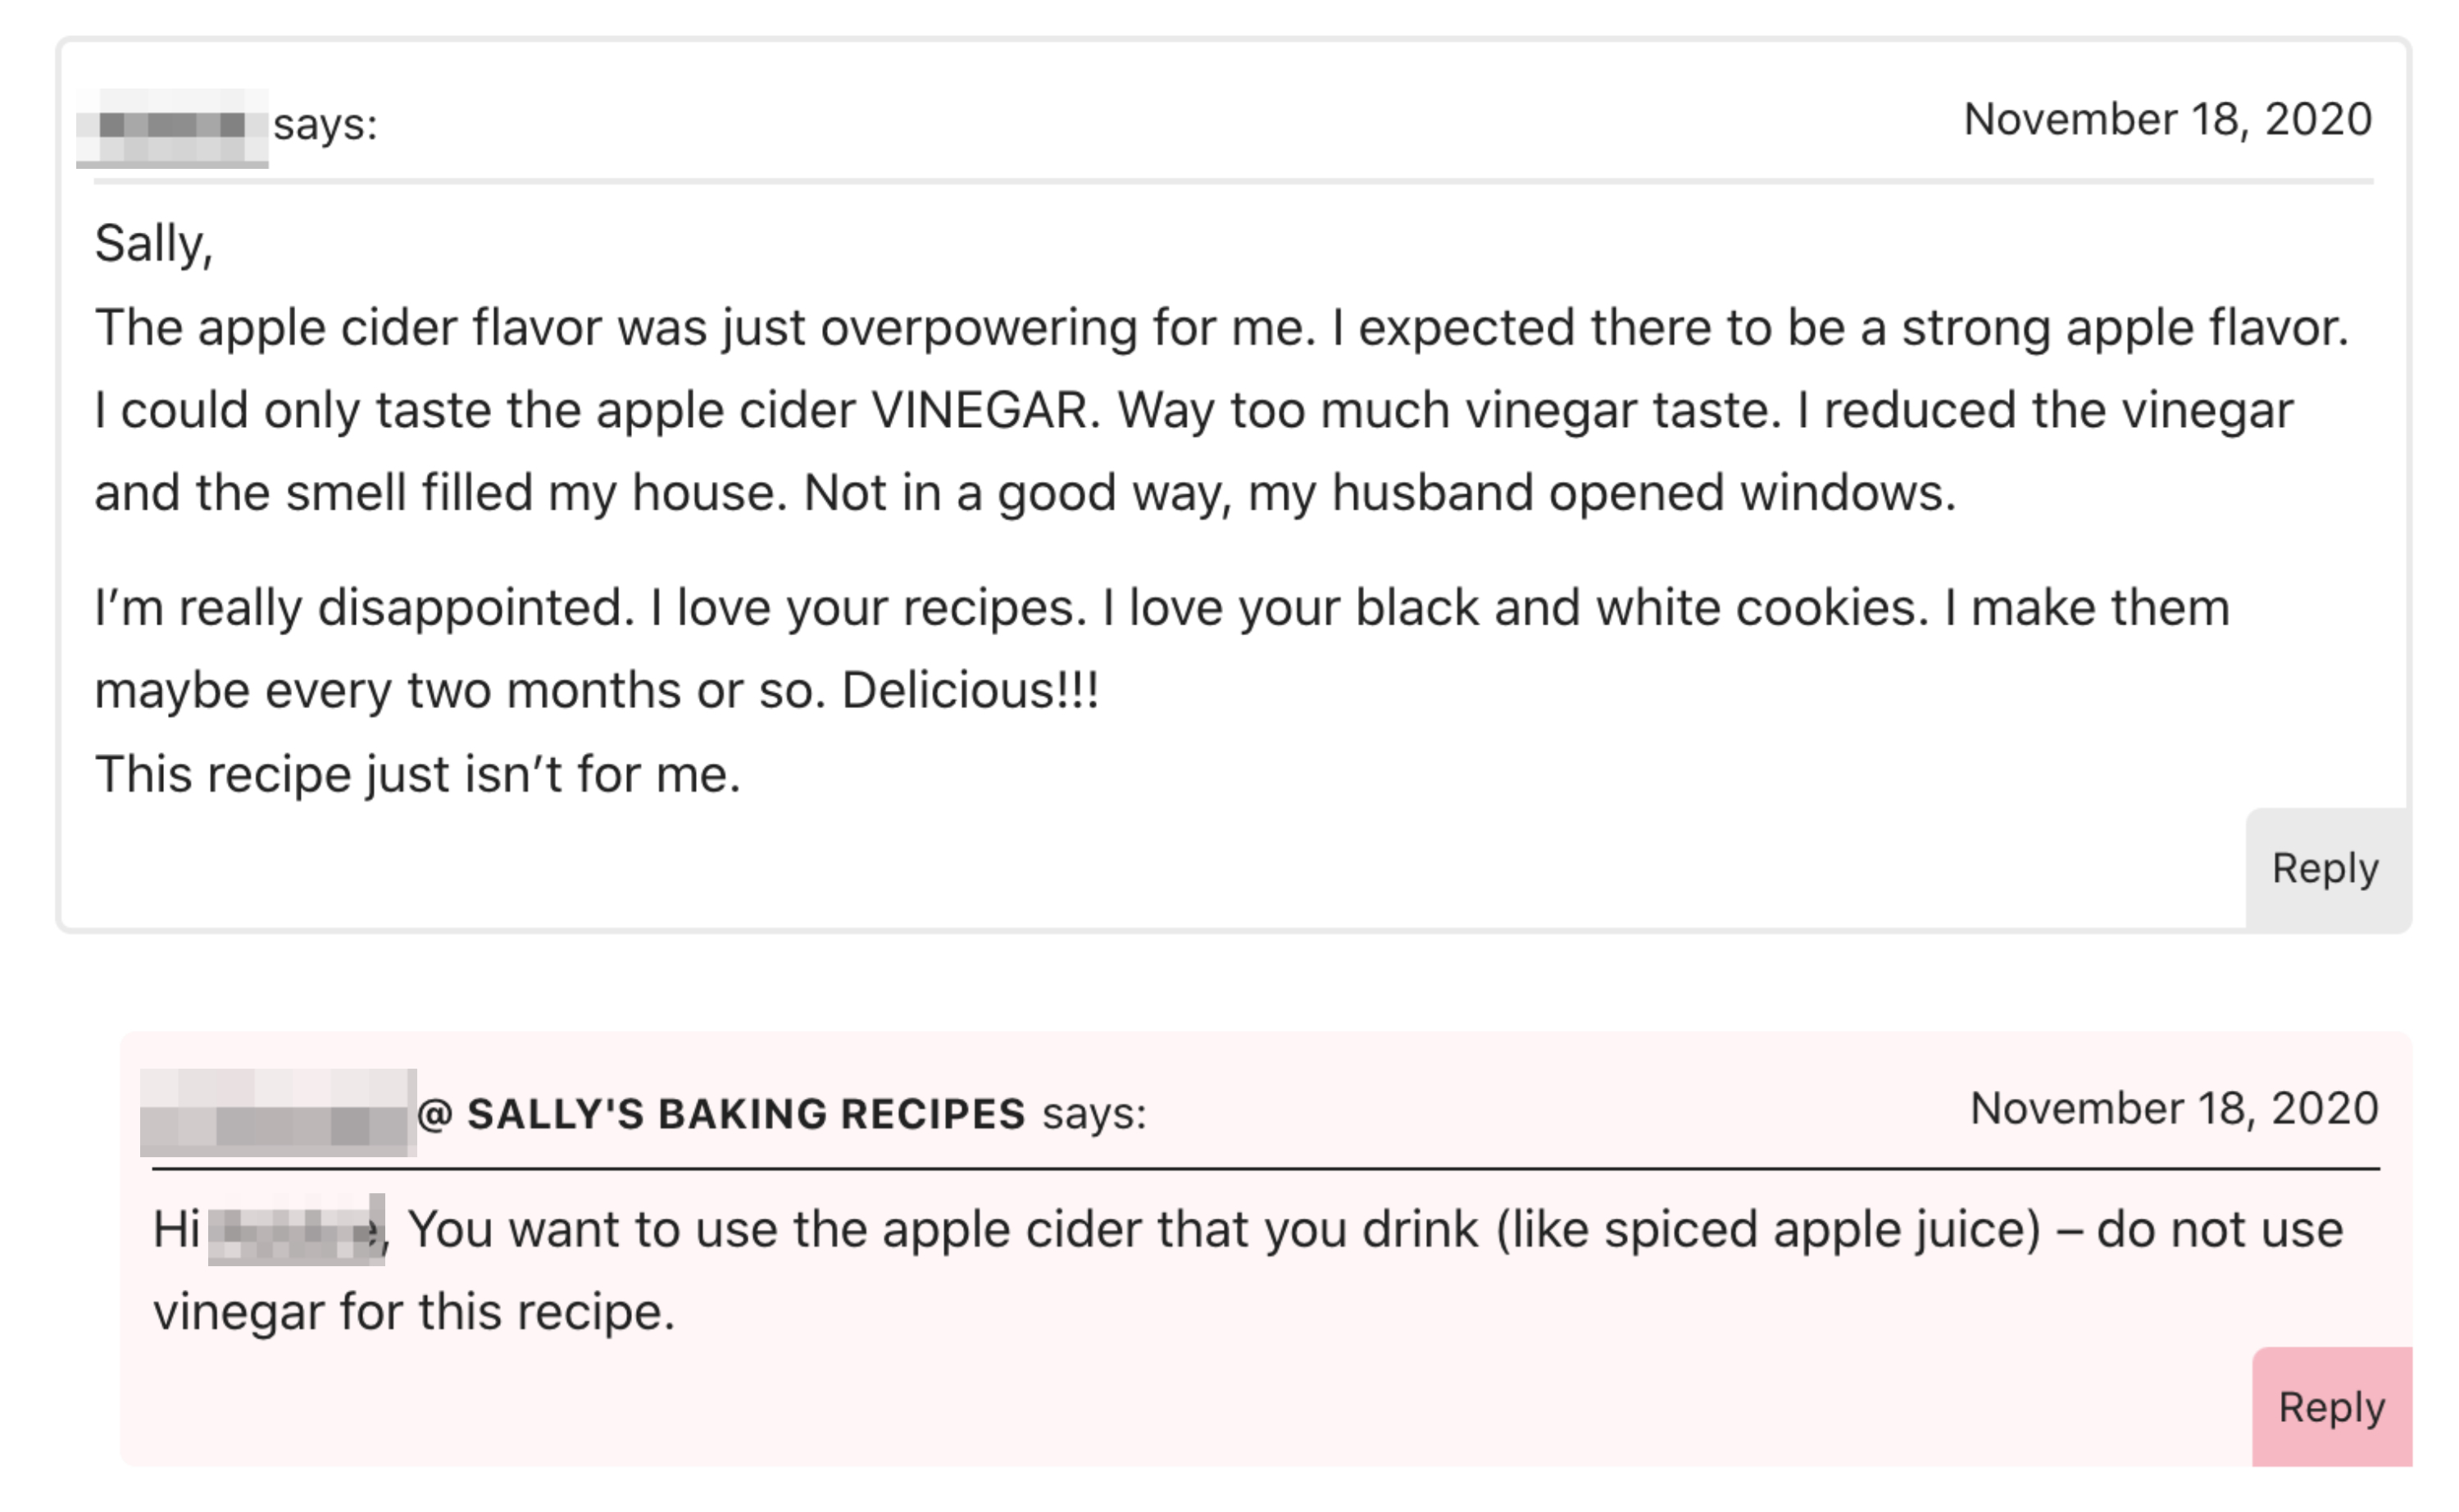 A negative review from someone who accidentally used apple cider vinegar rather than apple cider in a recipe